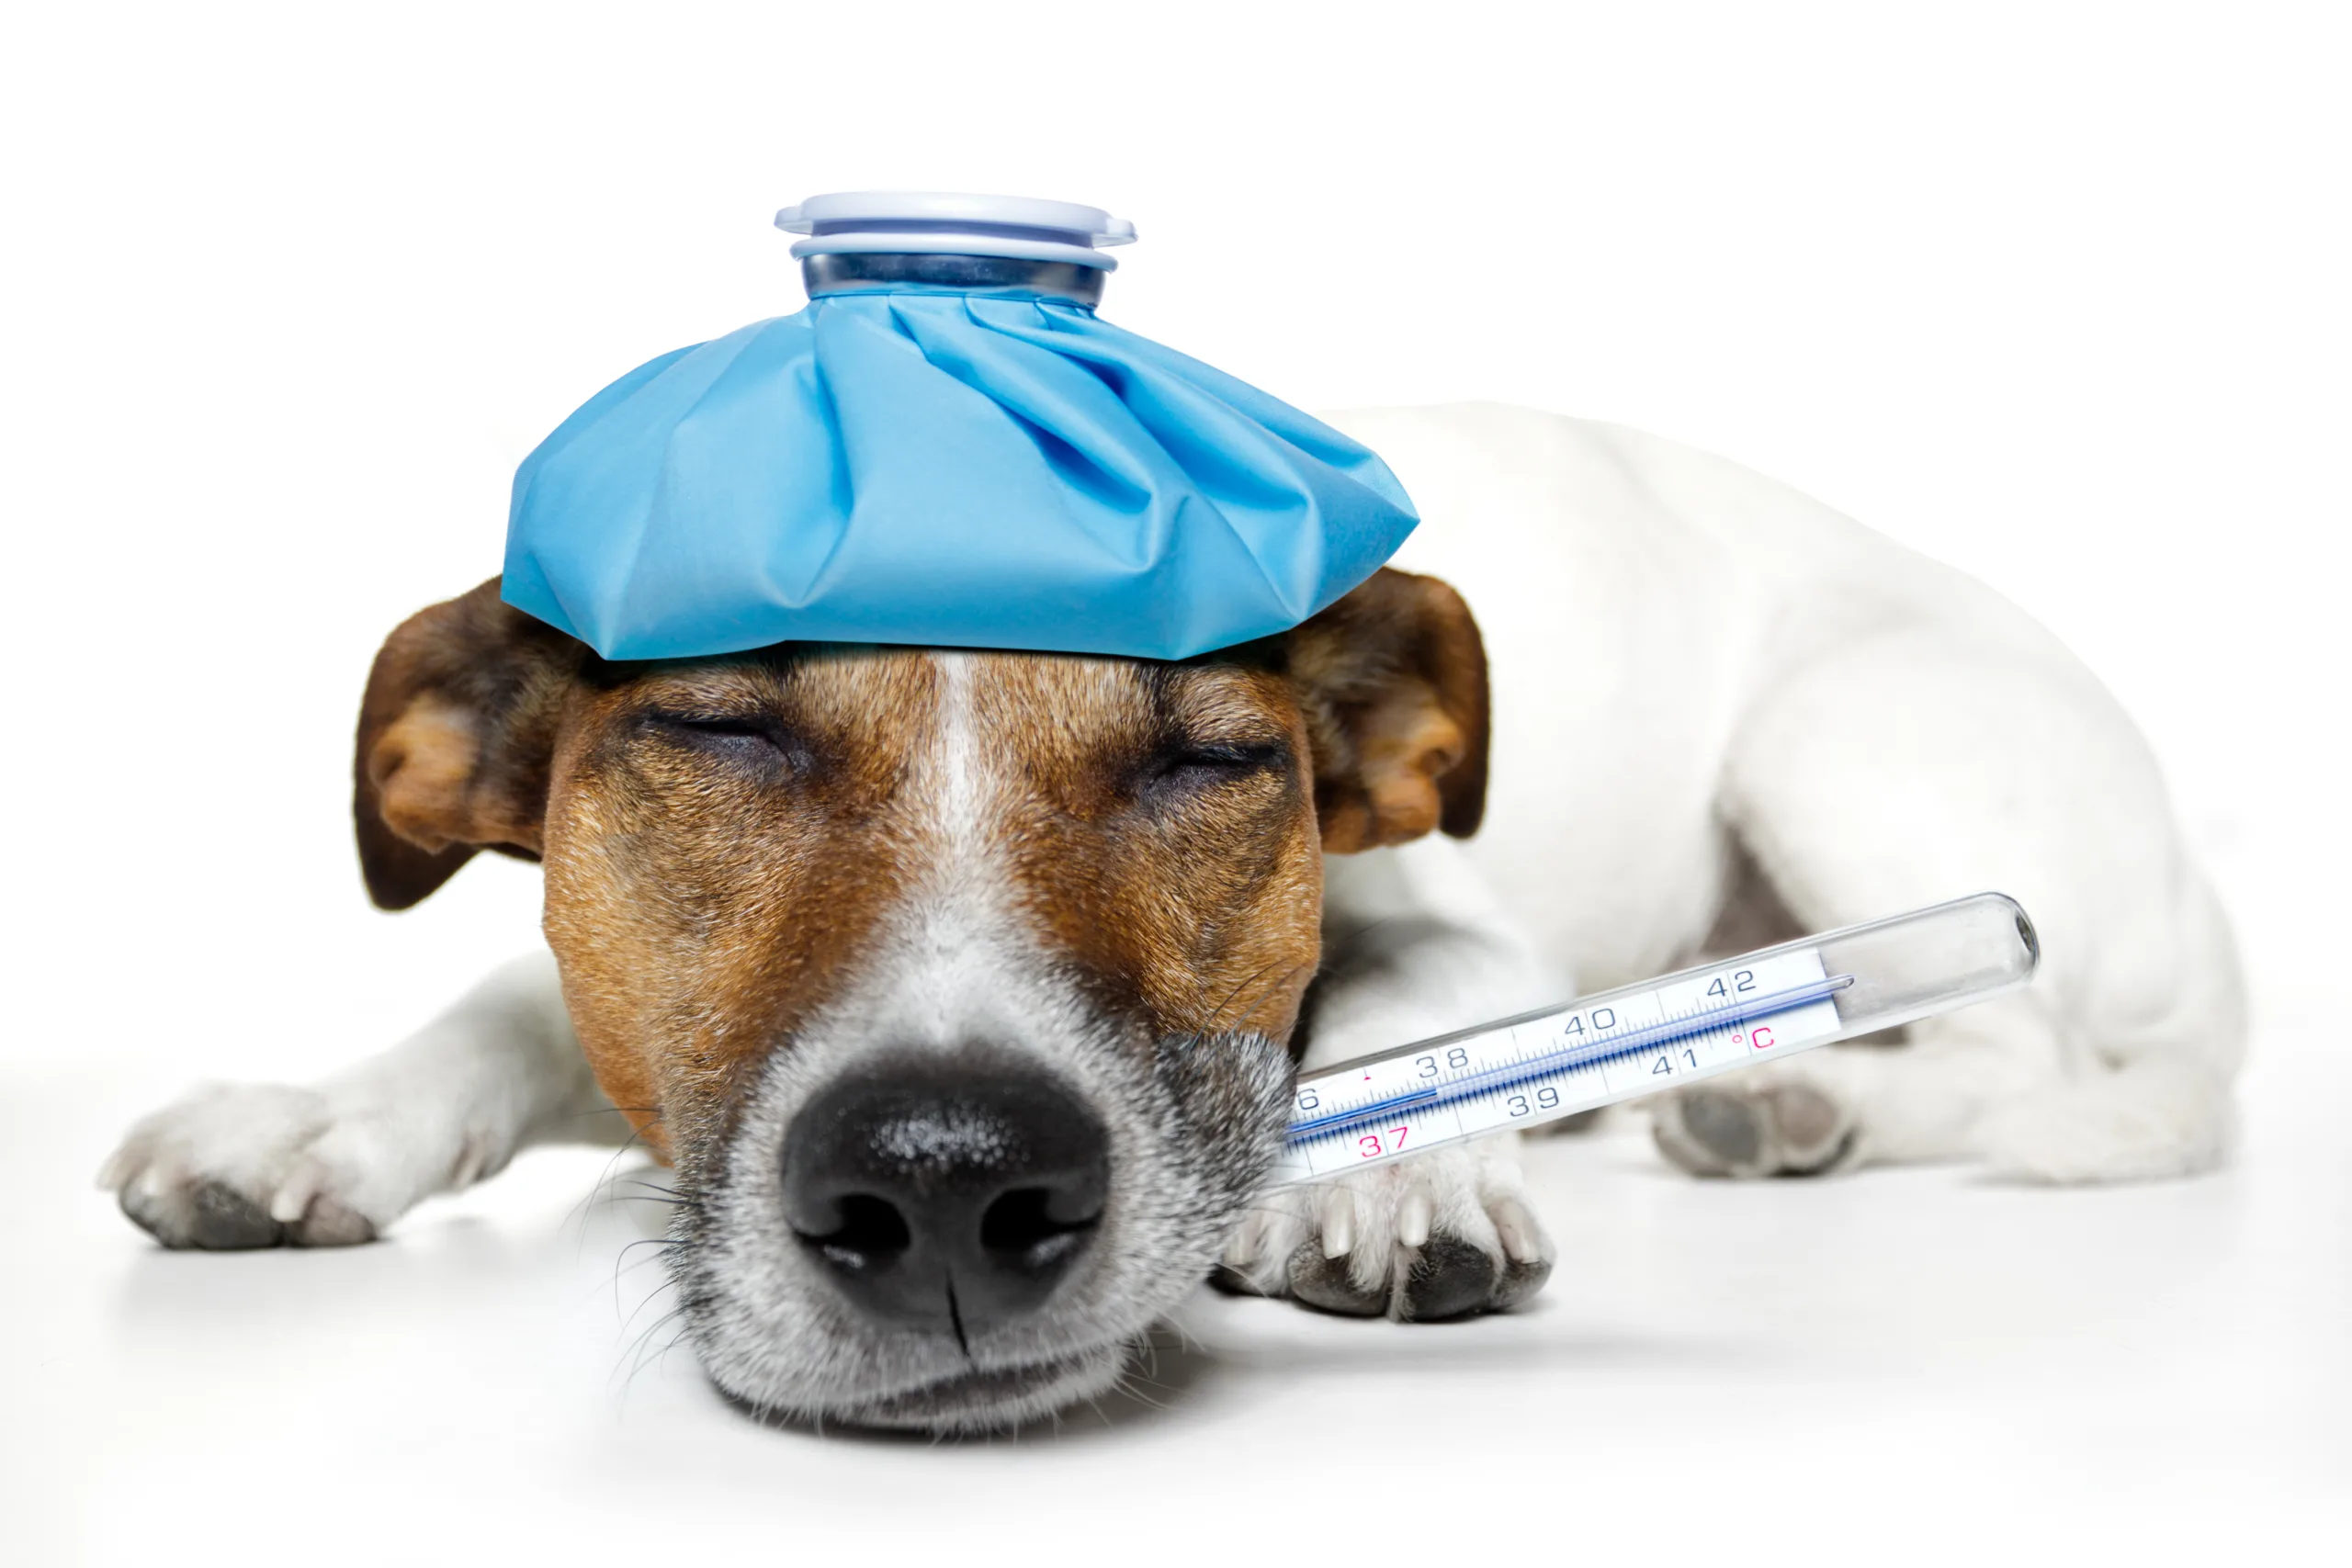 Can Value-based Care Benefits Translate to Veterinary Patients?